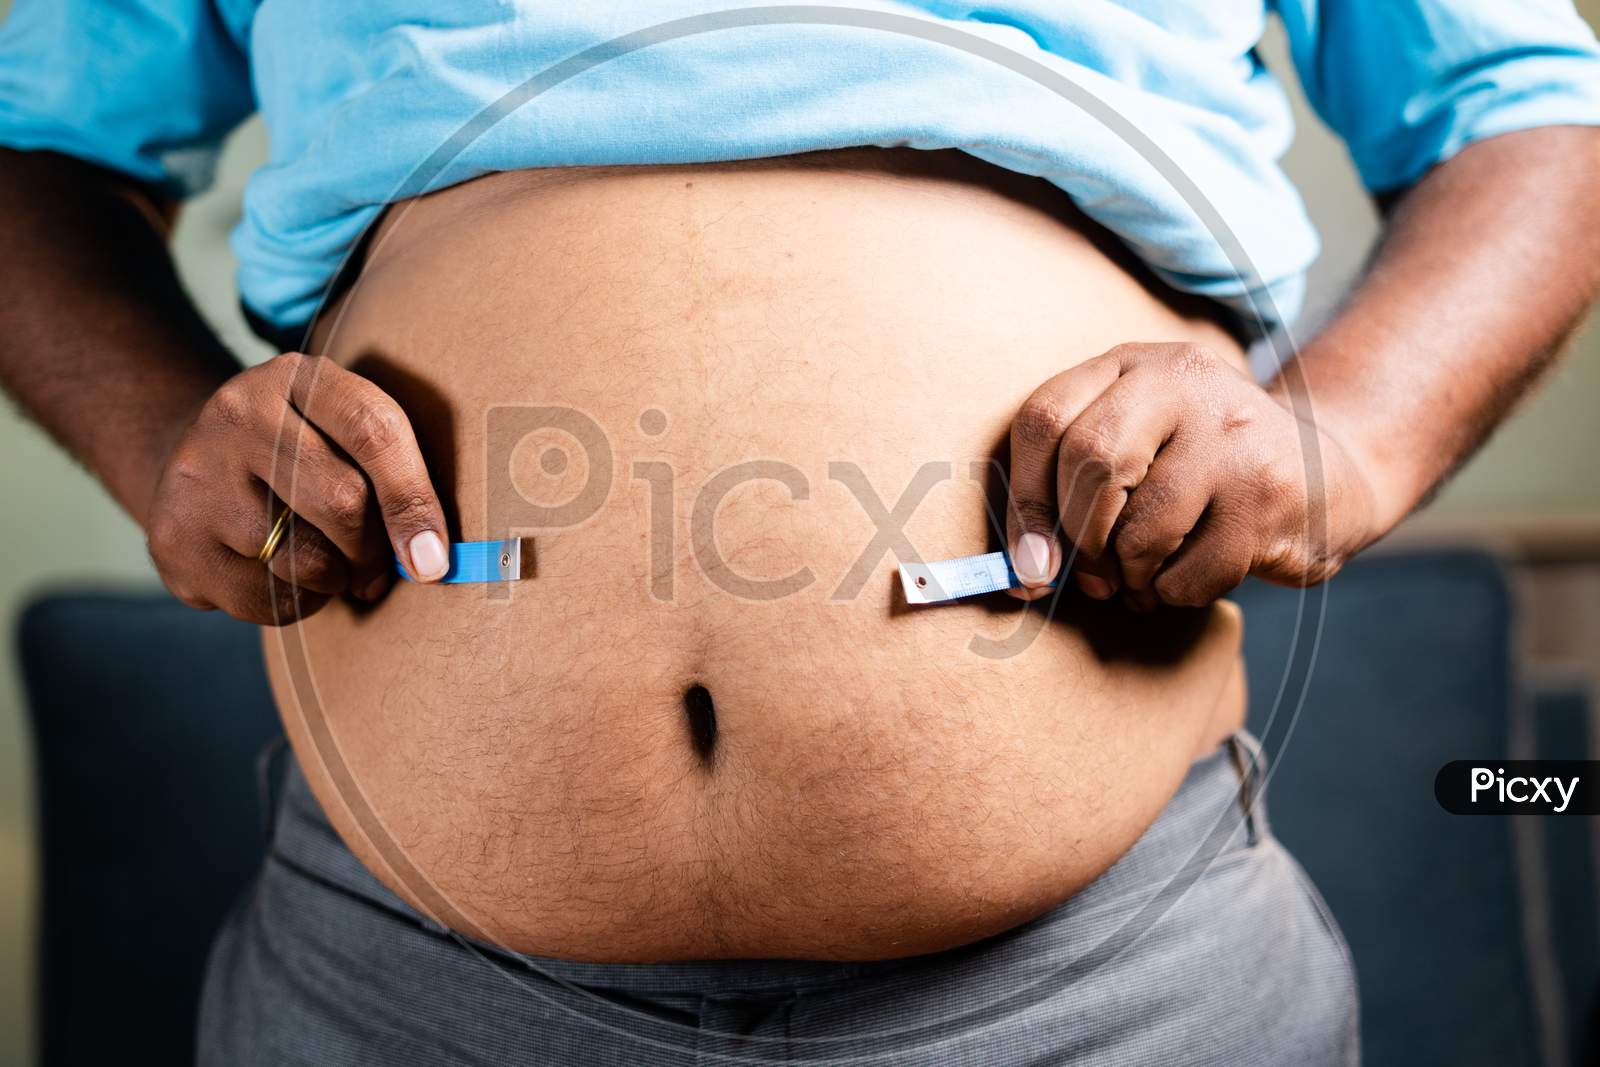 Unrecognizable Unhealthy Obese Man Checking Stomach Or Waist Fat Using Measuring Tape Before Diet At Home - Concept Of Suffering Body Overweight Due To Junk Food Habits.